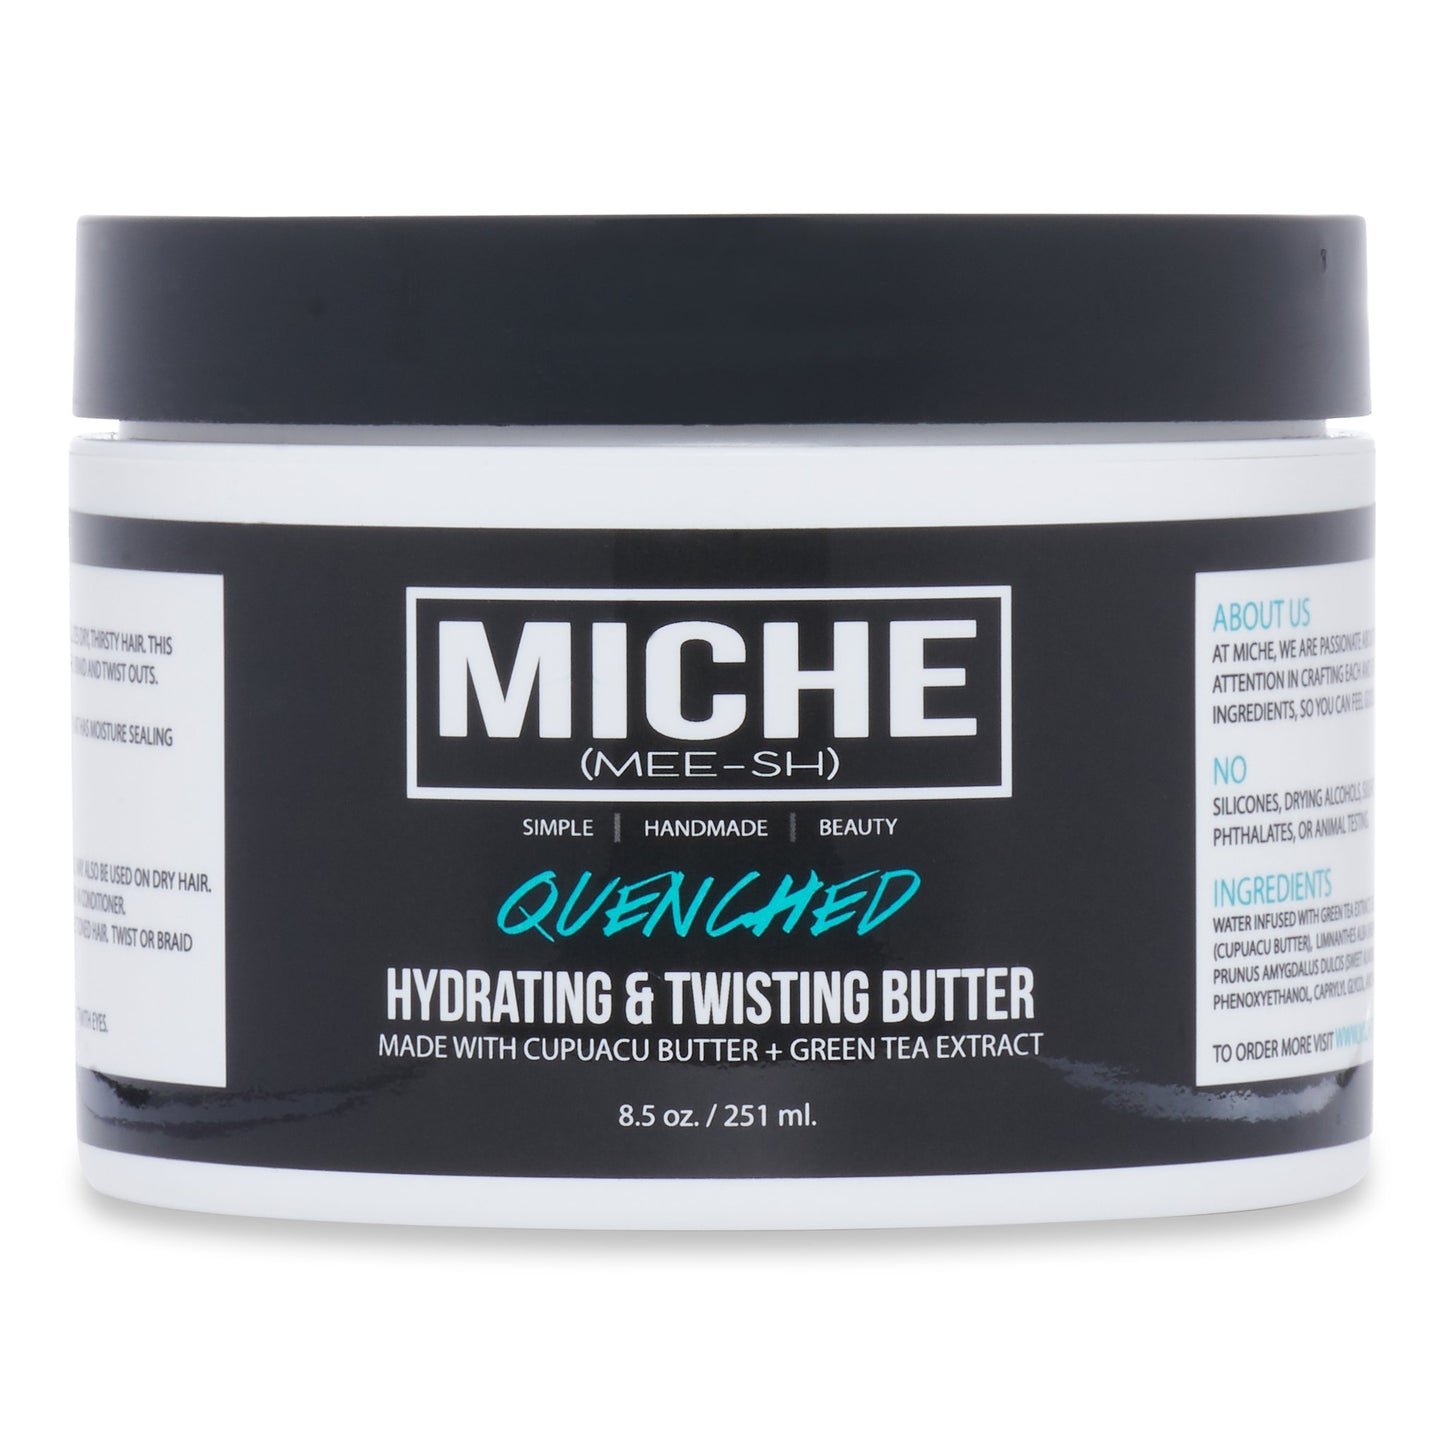 MICHE QUENCHED Hydrating & Twisting Butter